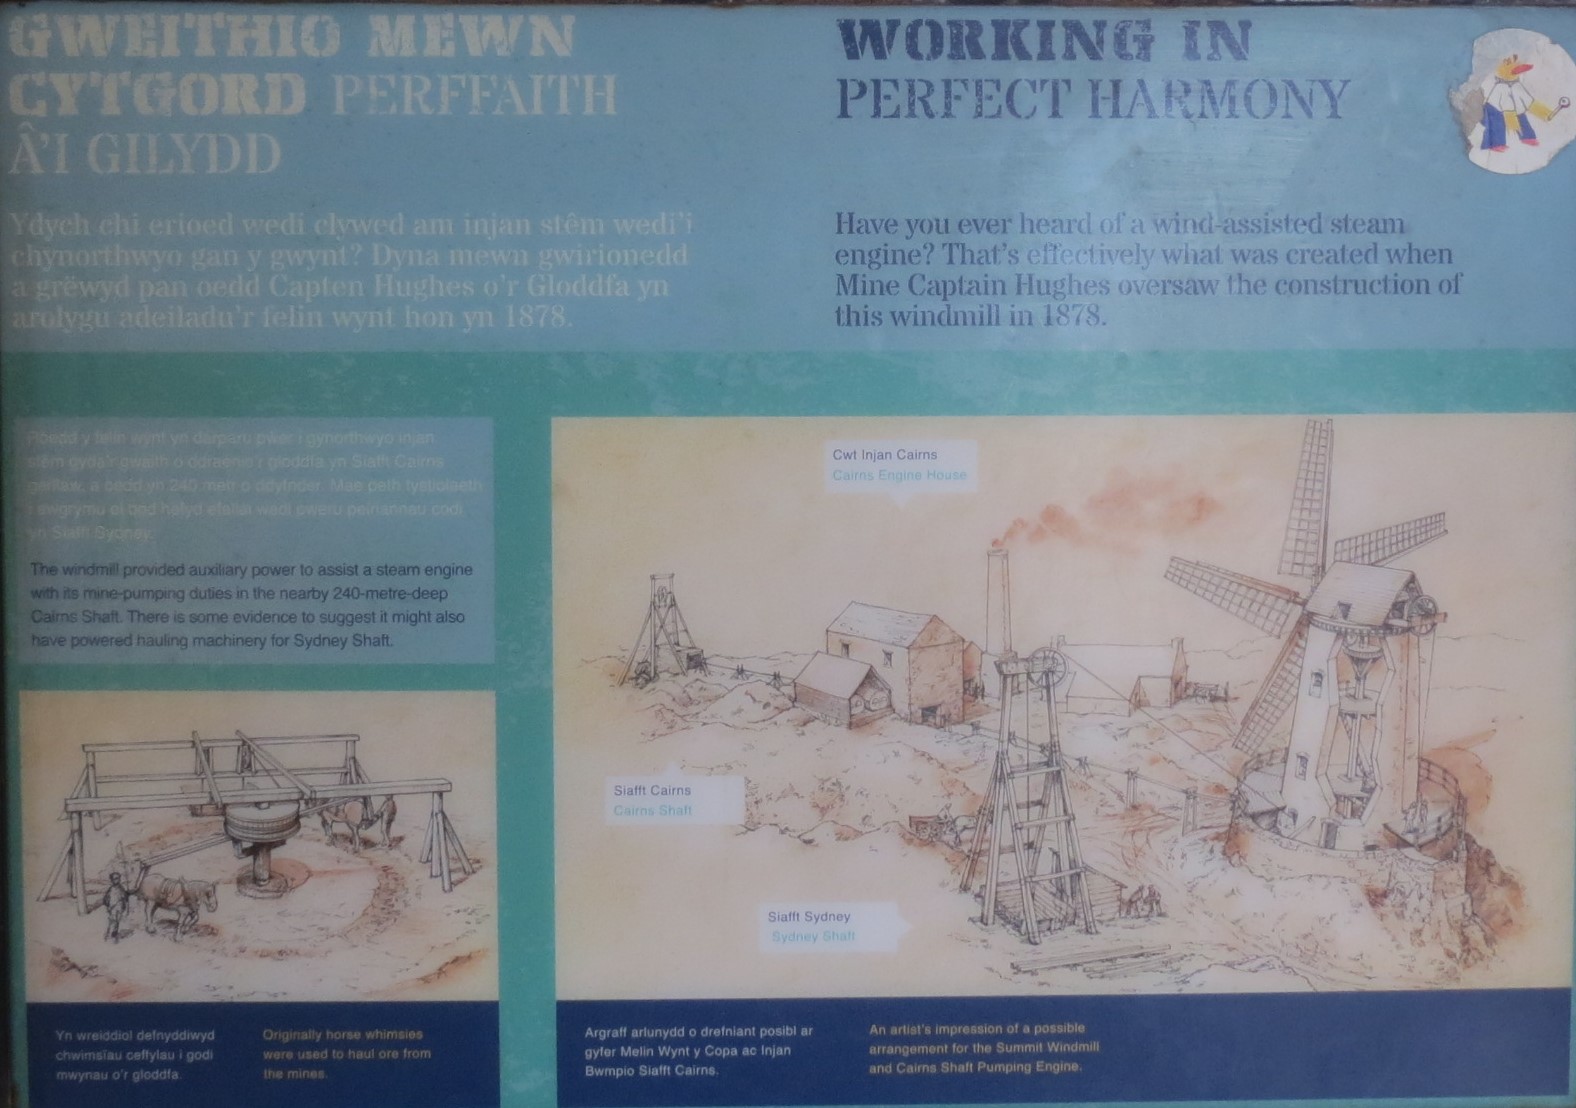 Pale blue information board titled 'Working in Perfect Harmony', providing information about the windmill. Also present is a diagram showing how the windmill was connected to nearby shafts.